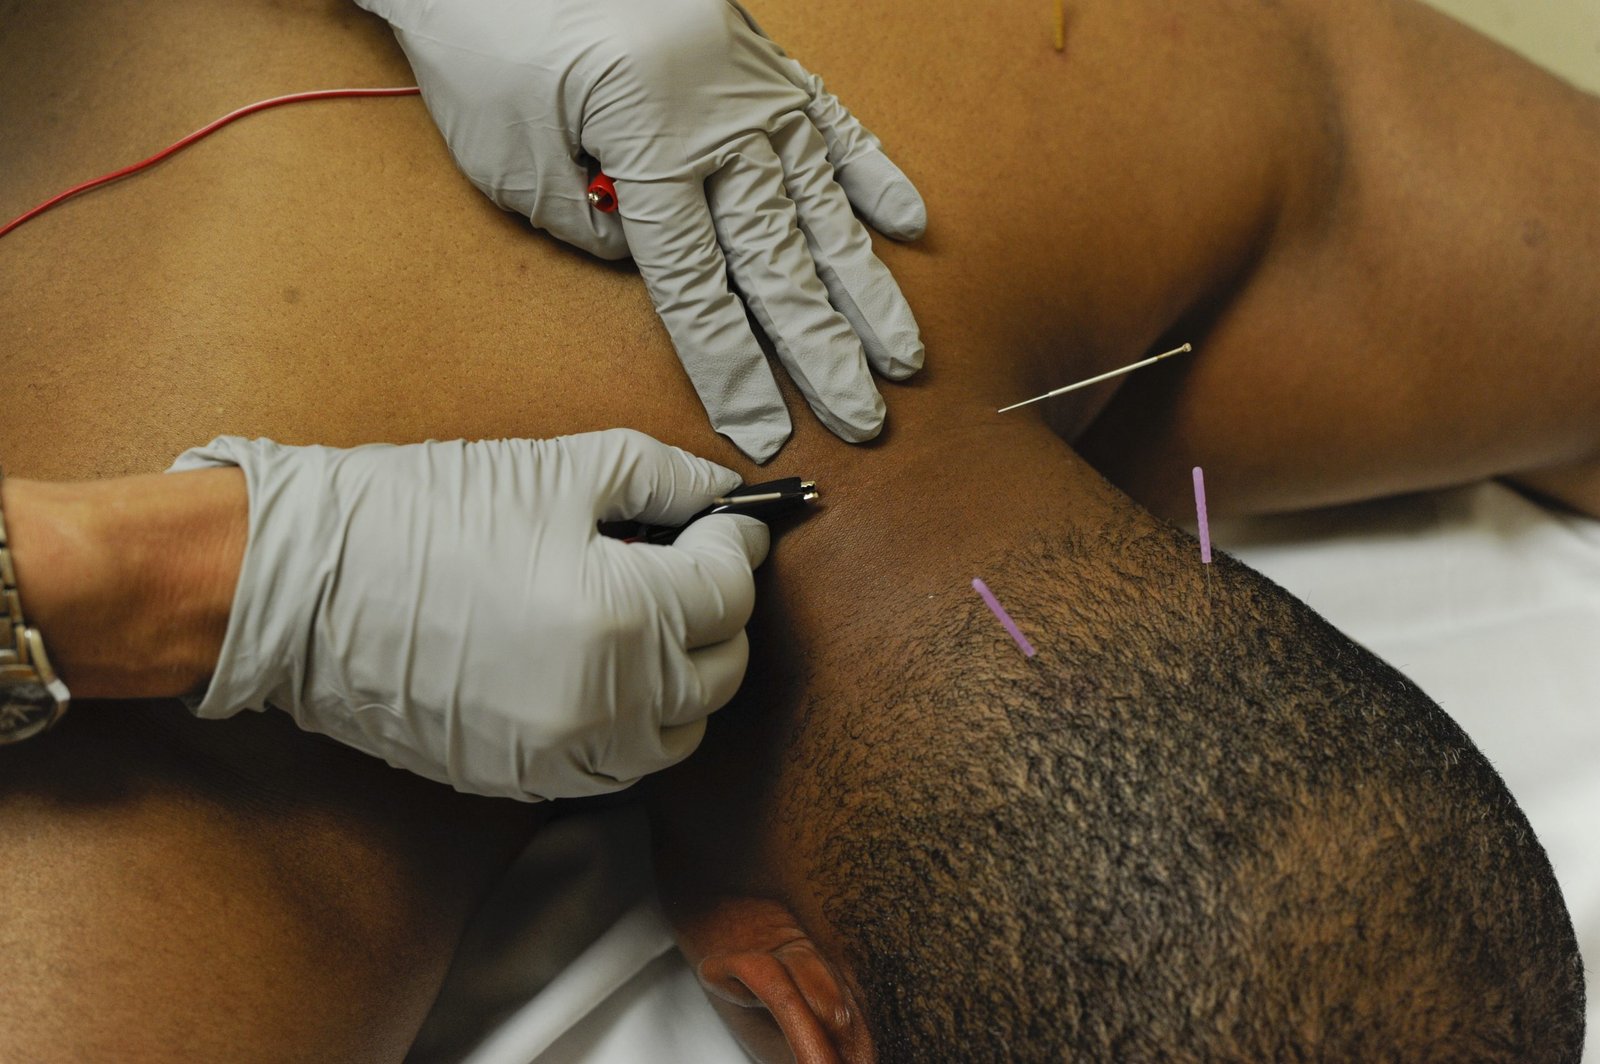 What Are the Benefits of Dry Needling and Cupping?